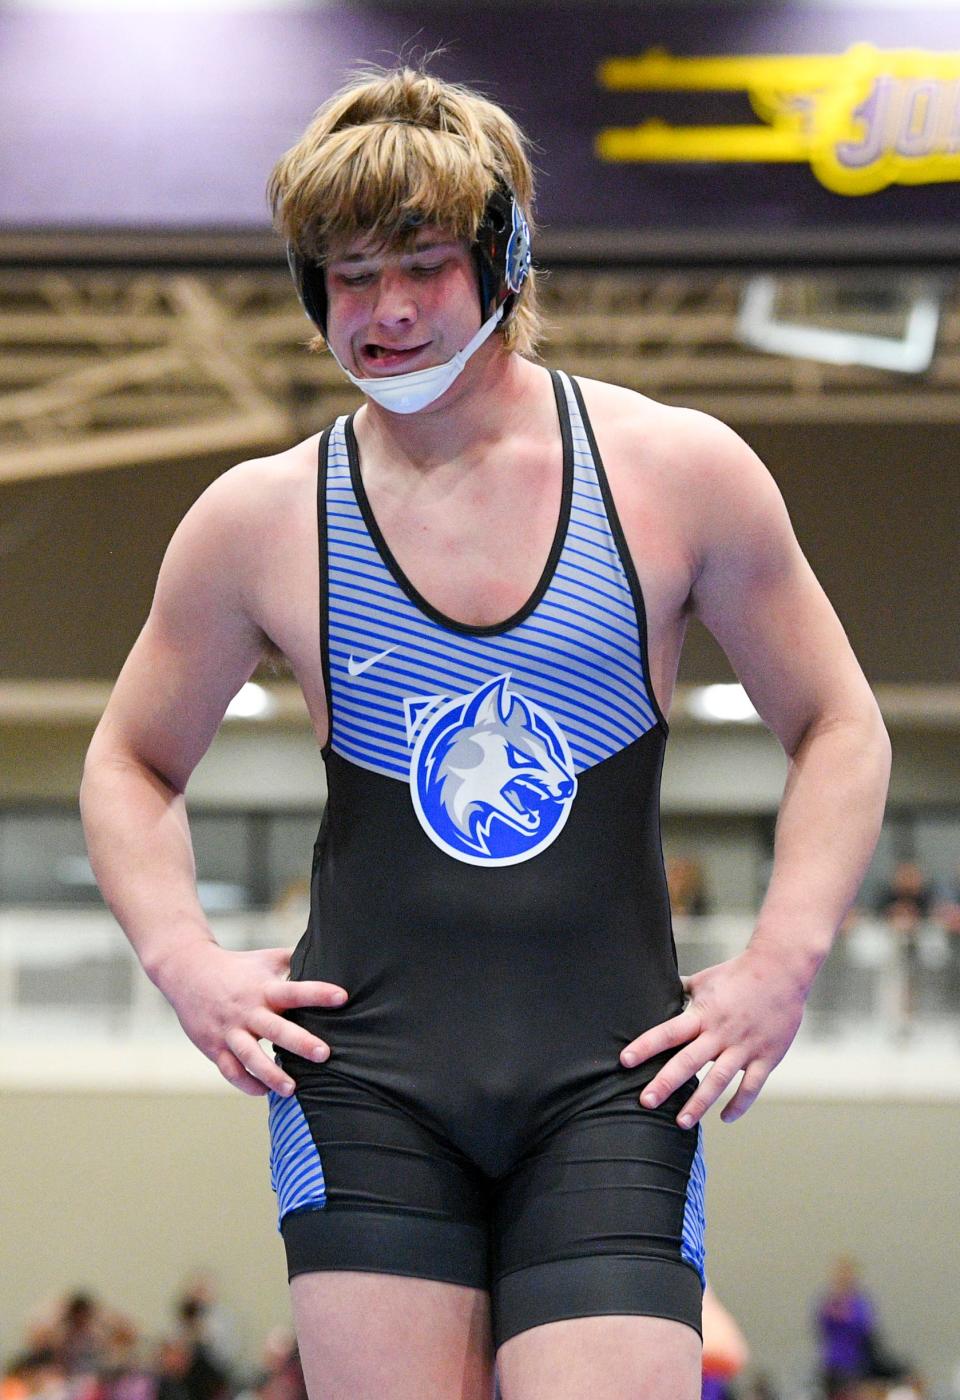 After recovering from blood clots and pneumonia last October, Waukee Northwest's Cael Winter was given the all-clear to return to sports on Jan. 5. He went on to take fifth at the Class 3A state wrestling tournament in February.